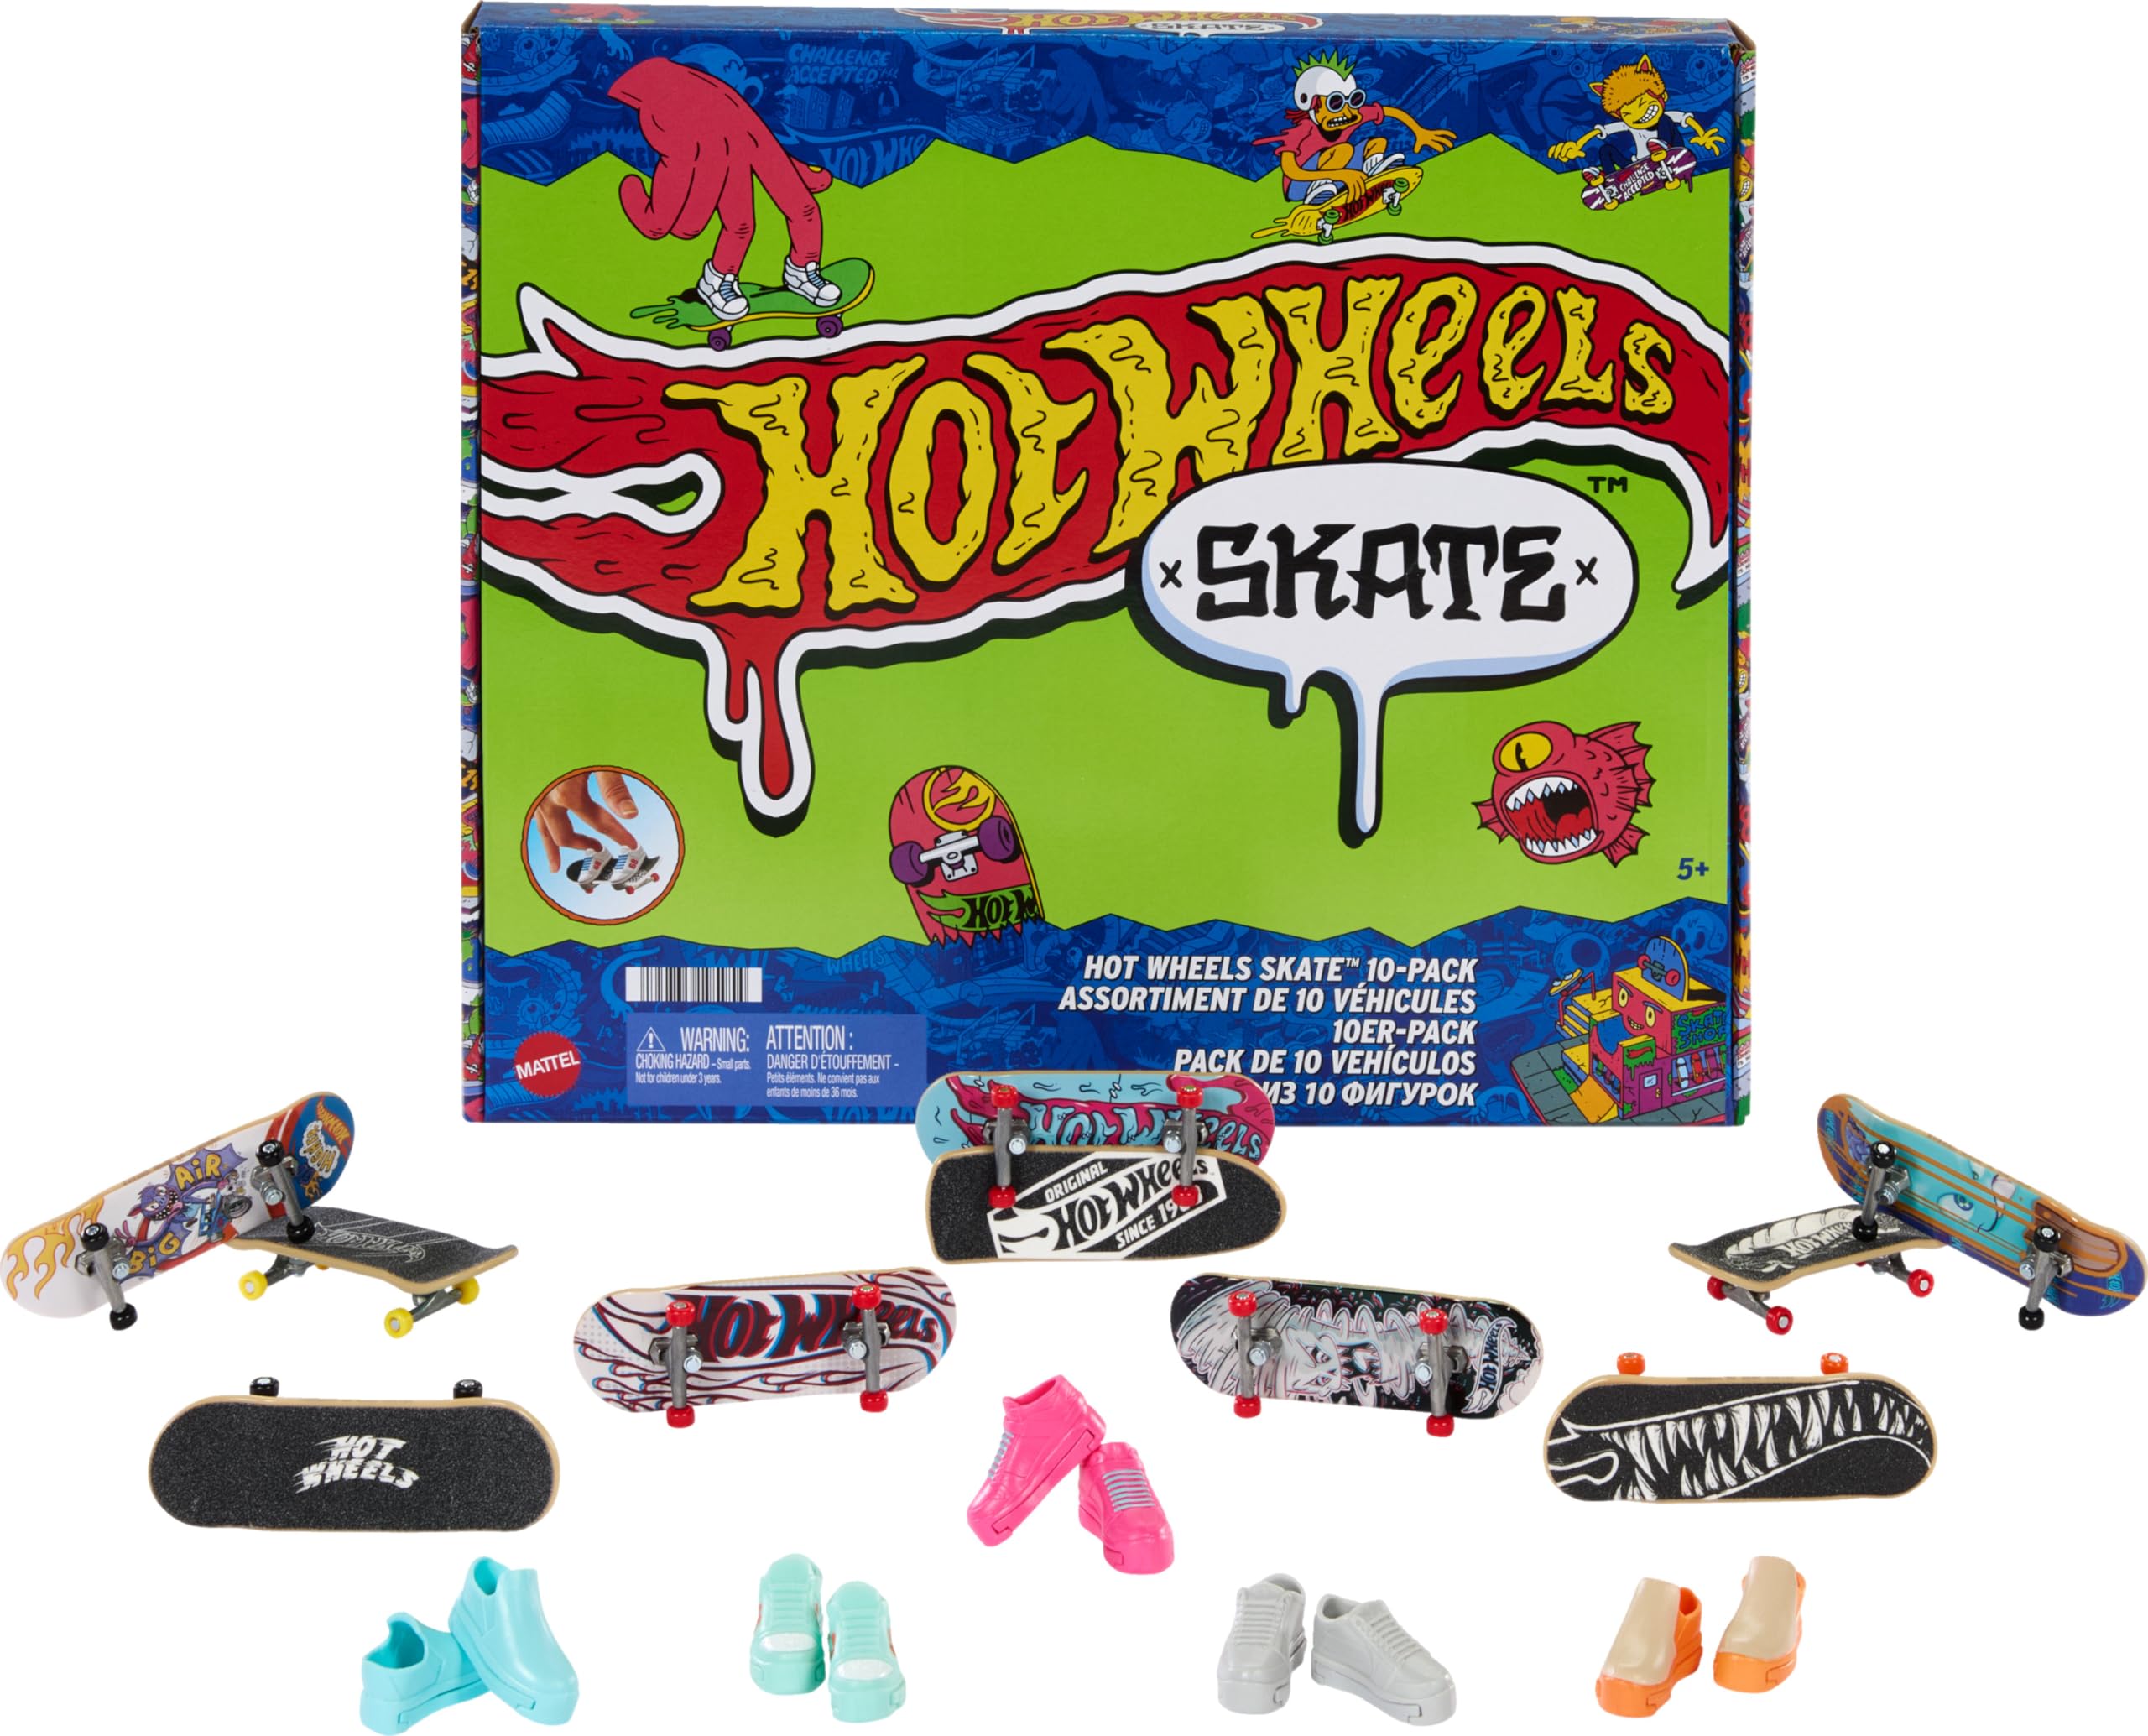 Hot Wheels Skate Fingerboards 10-Pack, Set of 10 Finger Skateboards with 5 Pairs of Removable Skate Shoes Themed Graphics (Amazon Exclusive)